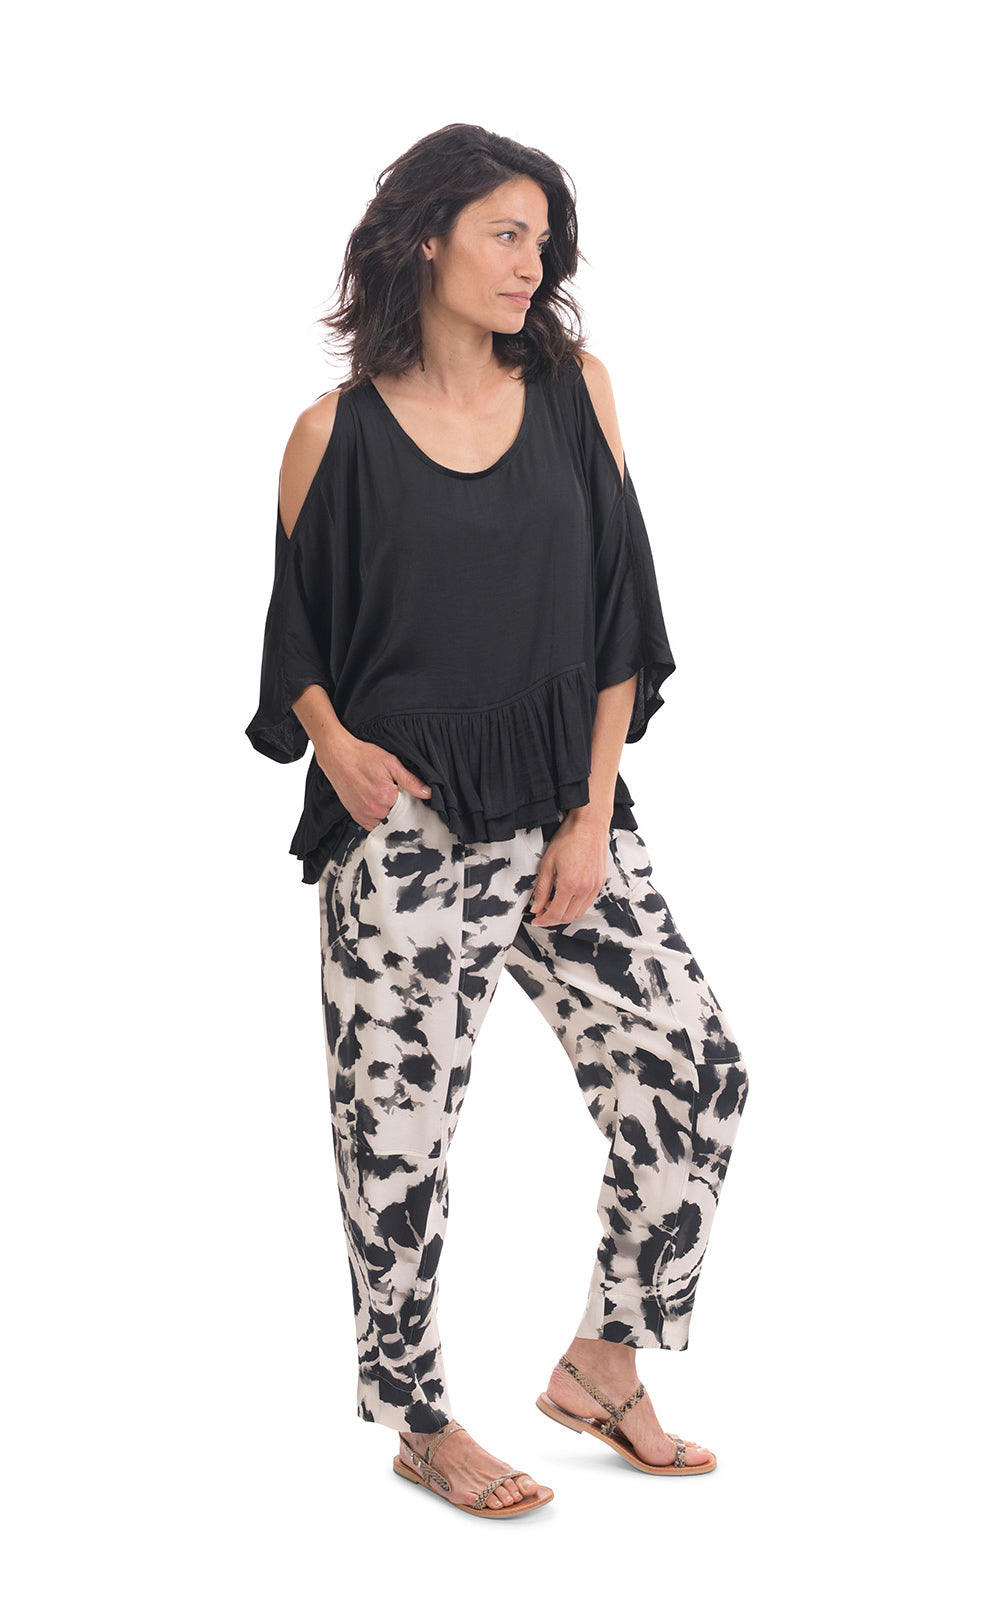 Front full body view of a woman wearing the rhys ruffle blouse in black. This top has a cold shoulder, a round neck, 3/4 length sleeves and a ruffled hem. On the bottom the woman is wearing black and white printed pants.